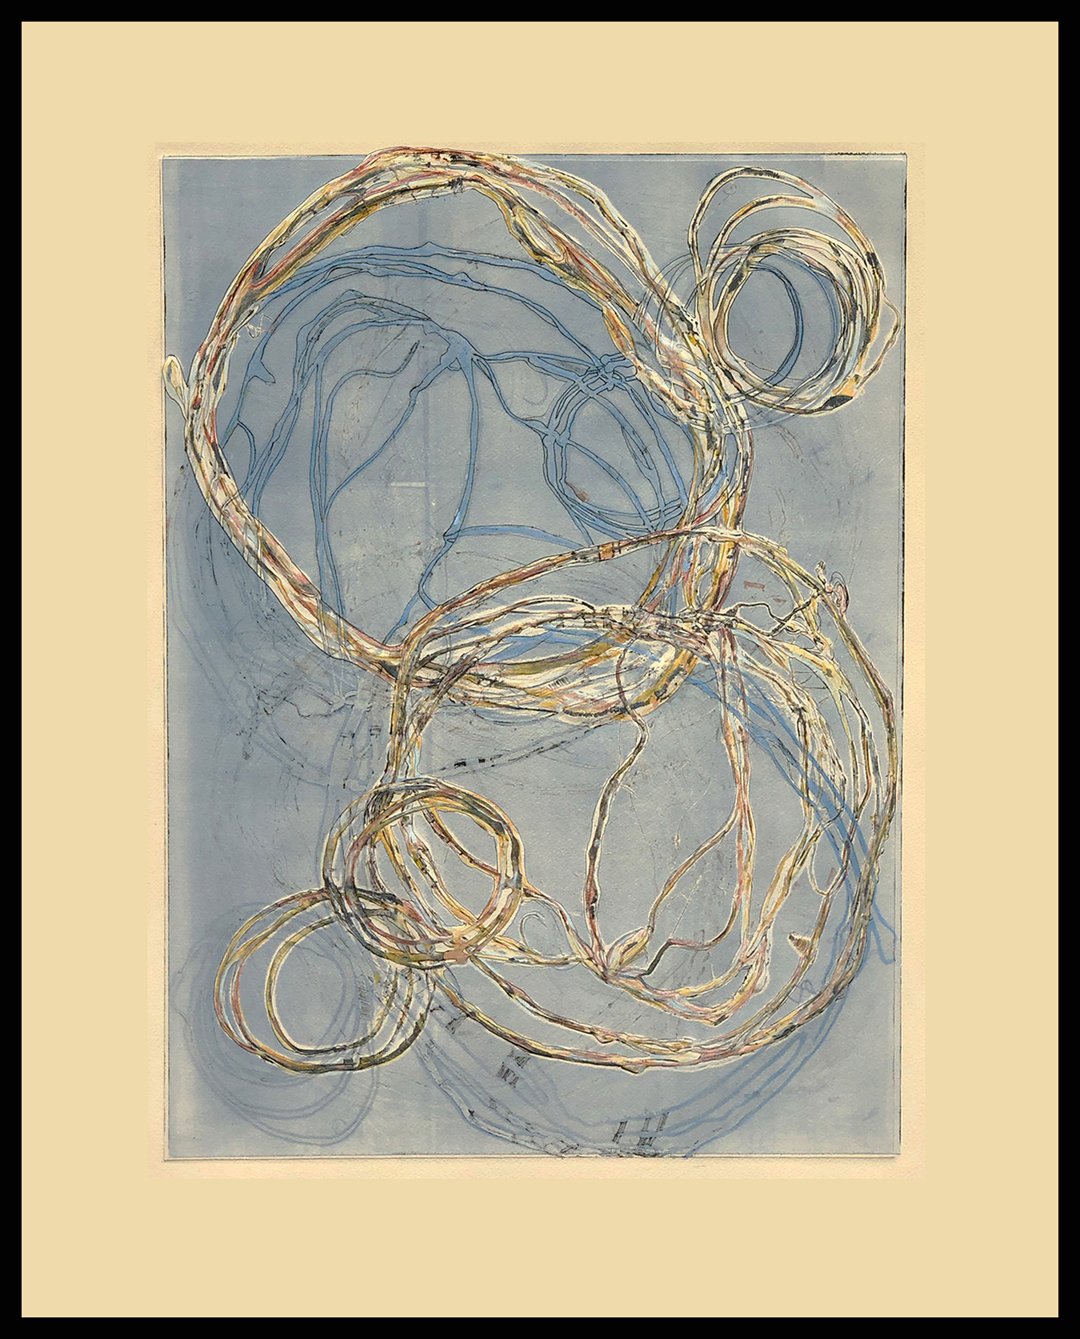    Entwined    The past and the present are interwoven revealing the stories of a lifetime.   Monotype with mixed media, custom mat and dark gray wood frame 34 x 26.5,” 1/1   $965 - SOLD  